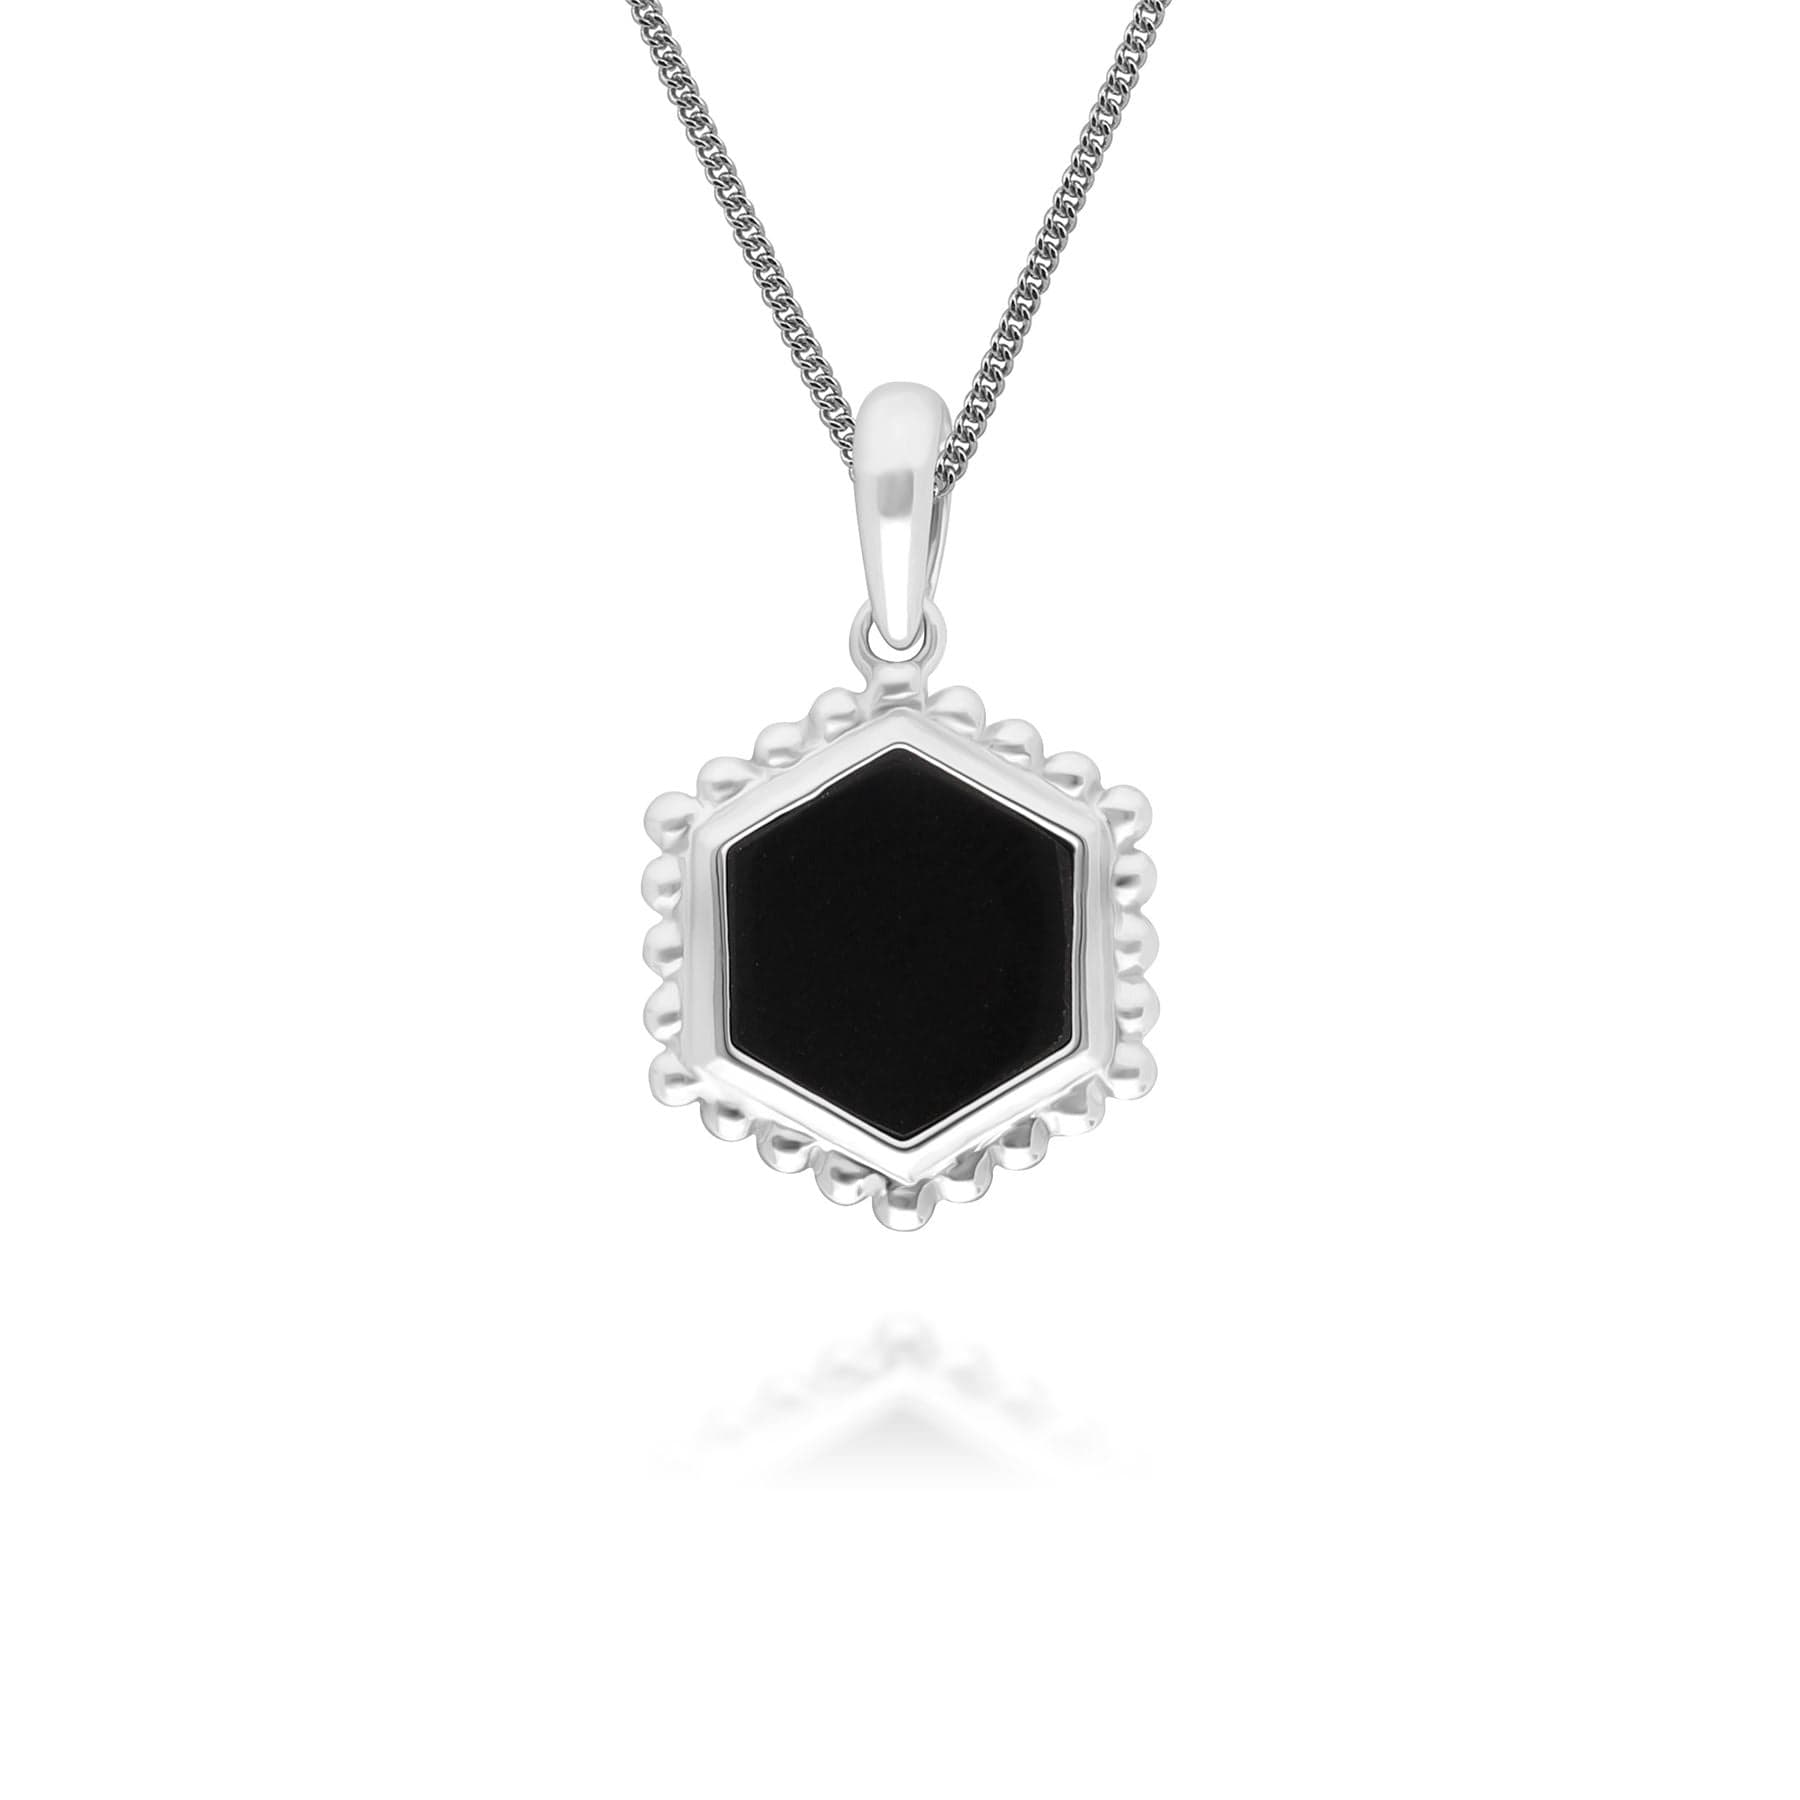 Image of Black Onyx Slice Pendant Necklace in 925 Sterling Silver